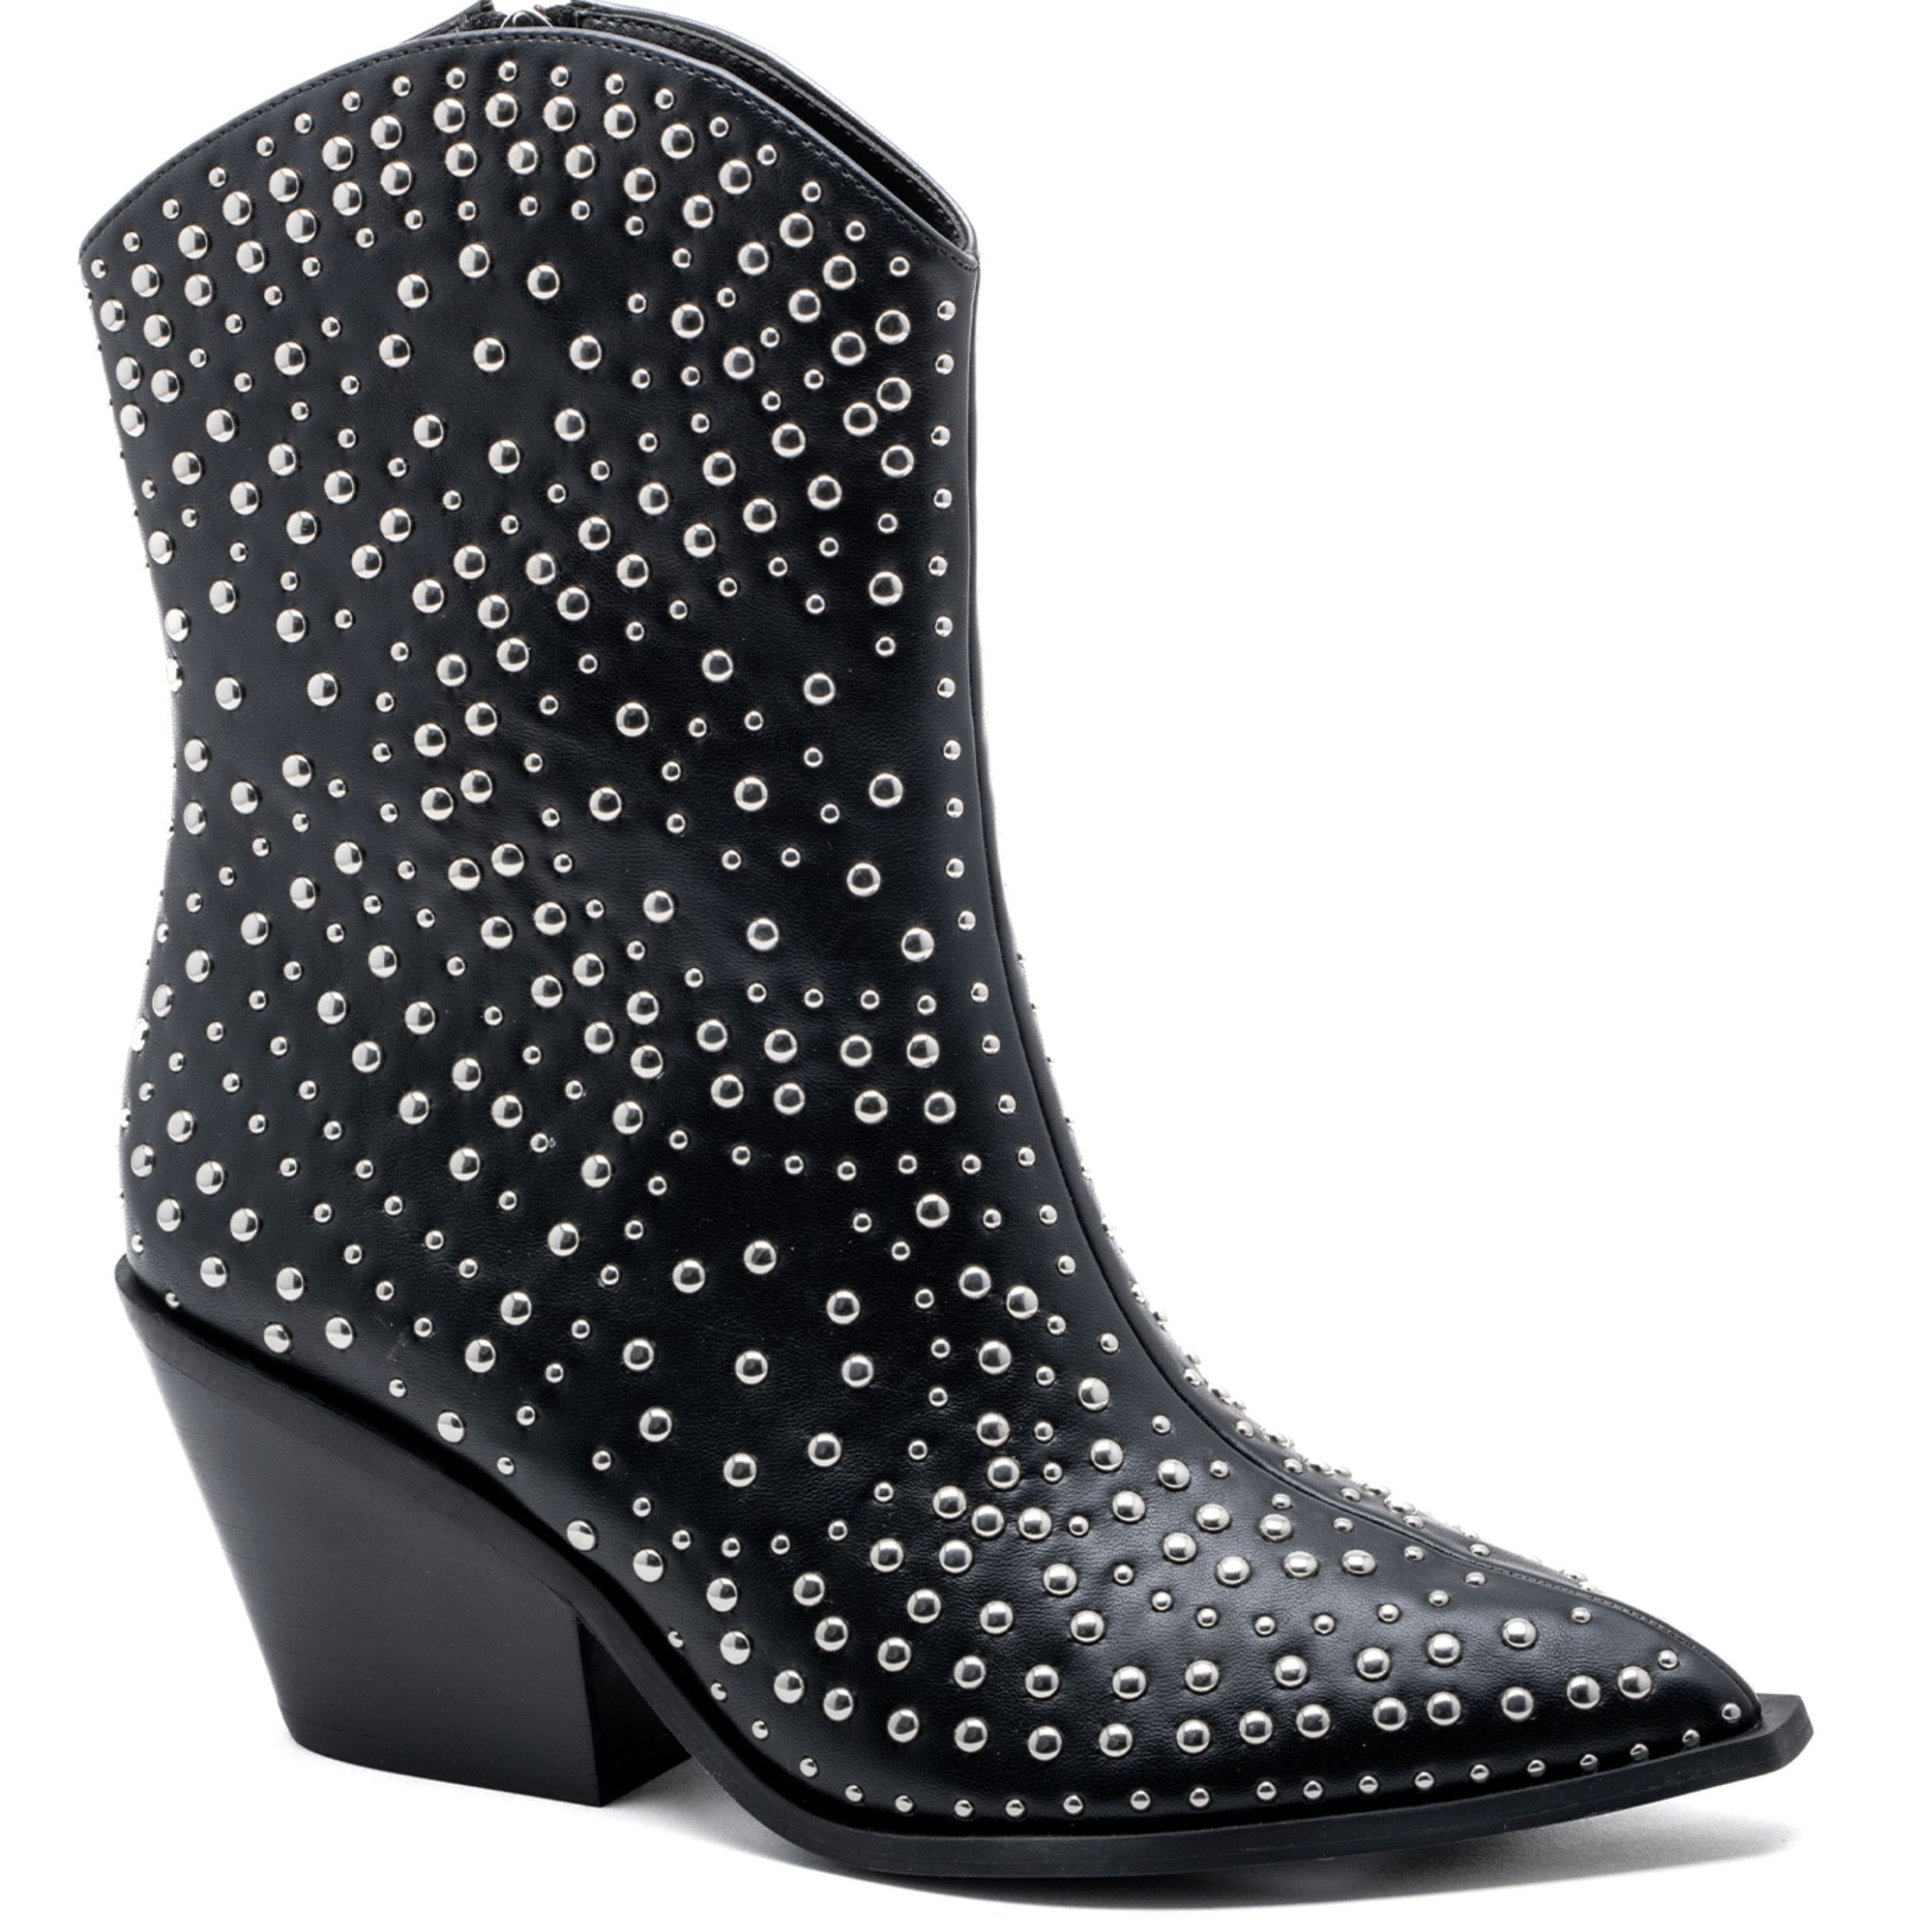 Lowlights Boot with Silver Studs - Black - Lavender Hills BeautyCorkys Footwear